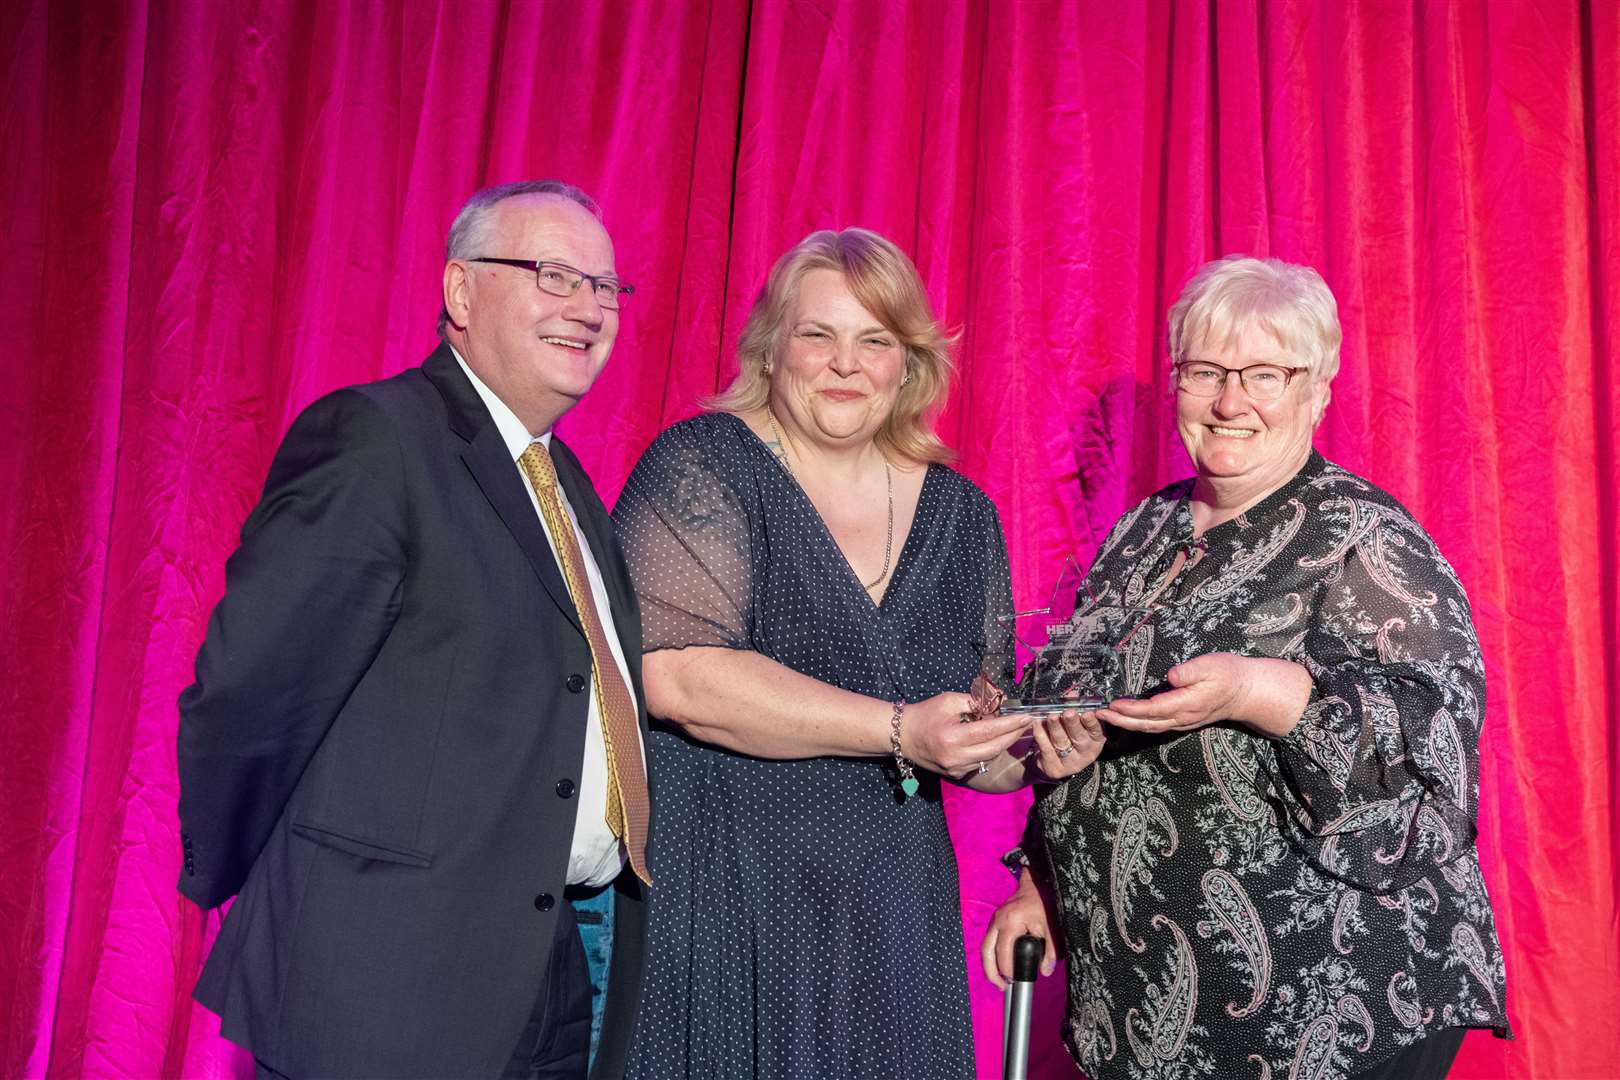 Buckie's Roots were named Community Champion of the Year and the award was presented by Roz Cassidy, the HR Manager of Walkers Shortbread (centre). Receiving the trophy were the group's Meg Jamieson and Gifford Leslie. Picture: Beth Taylor